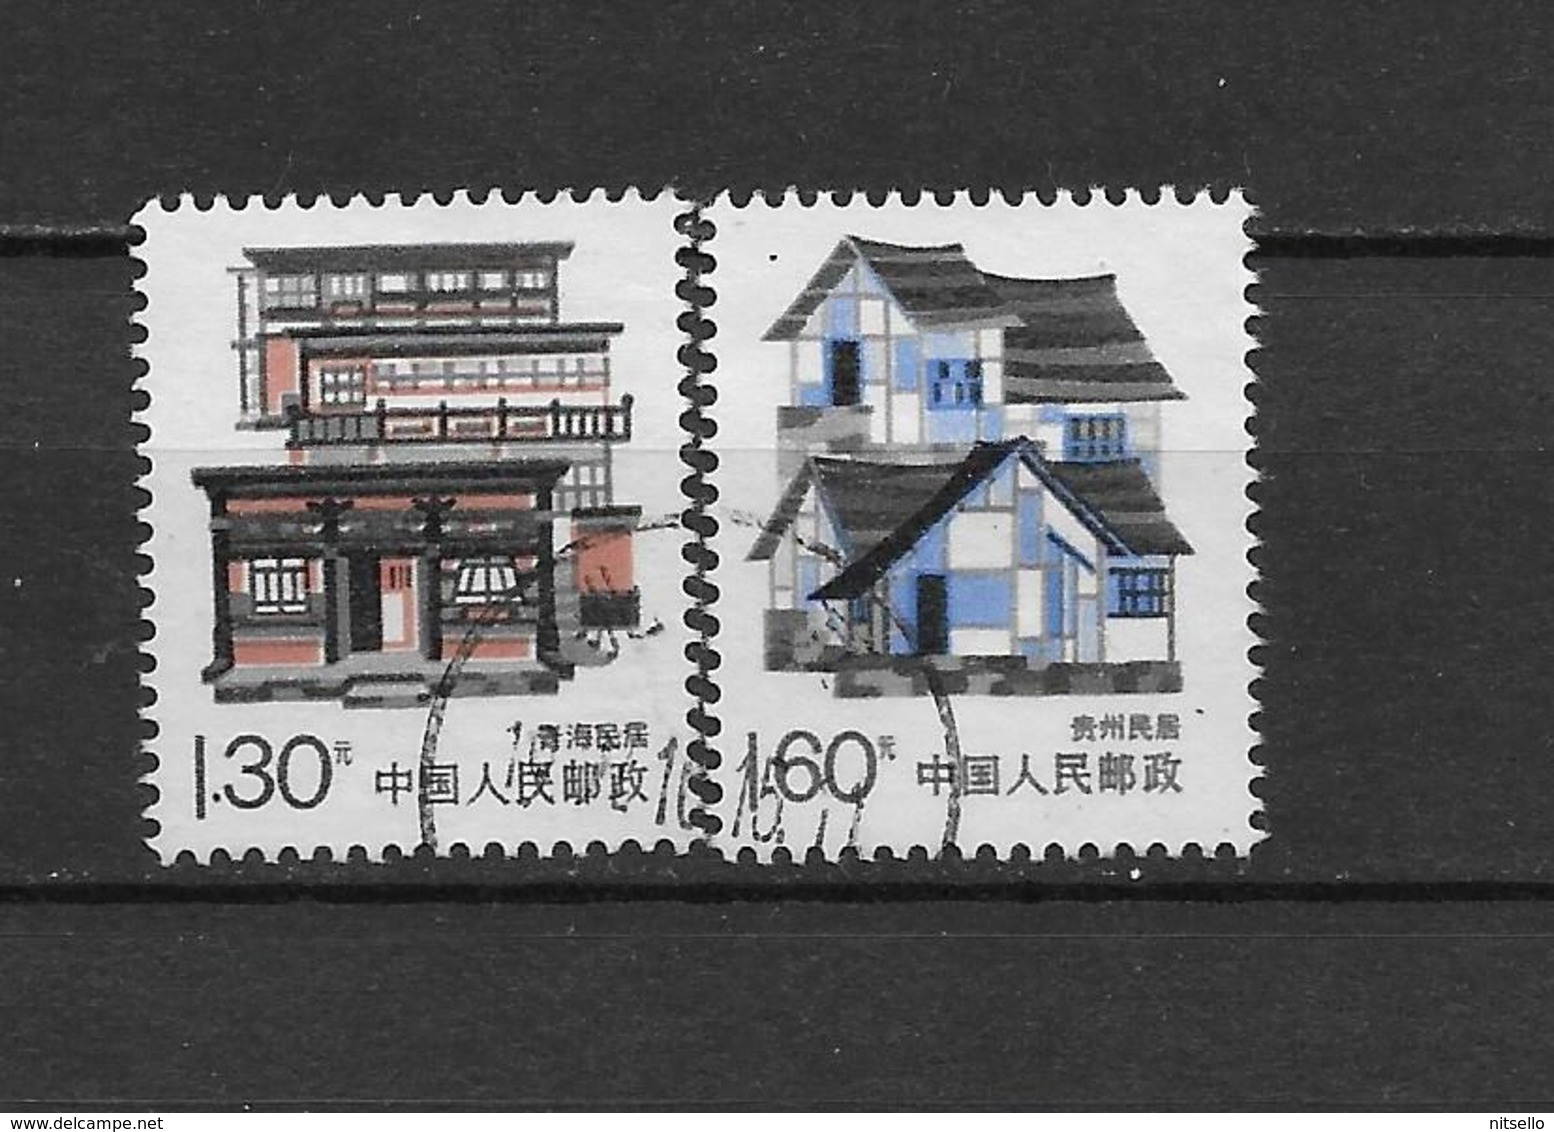 LOTE 1799  ///  (C035)  CHINA  1989  MICHEL Nº: 2225/26  LUXE - Used Stamps